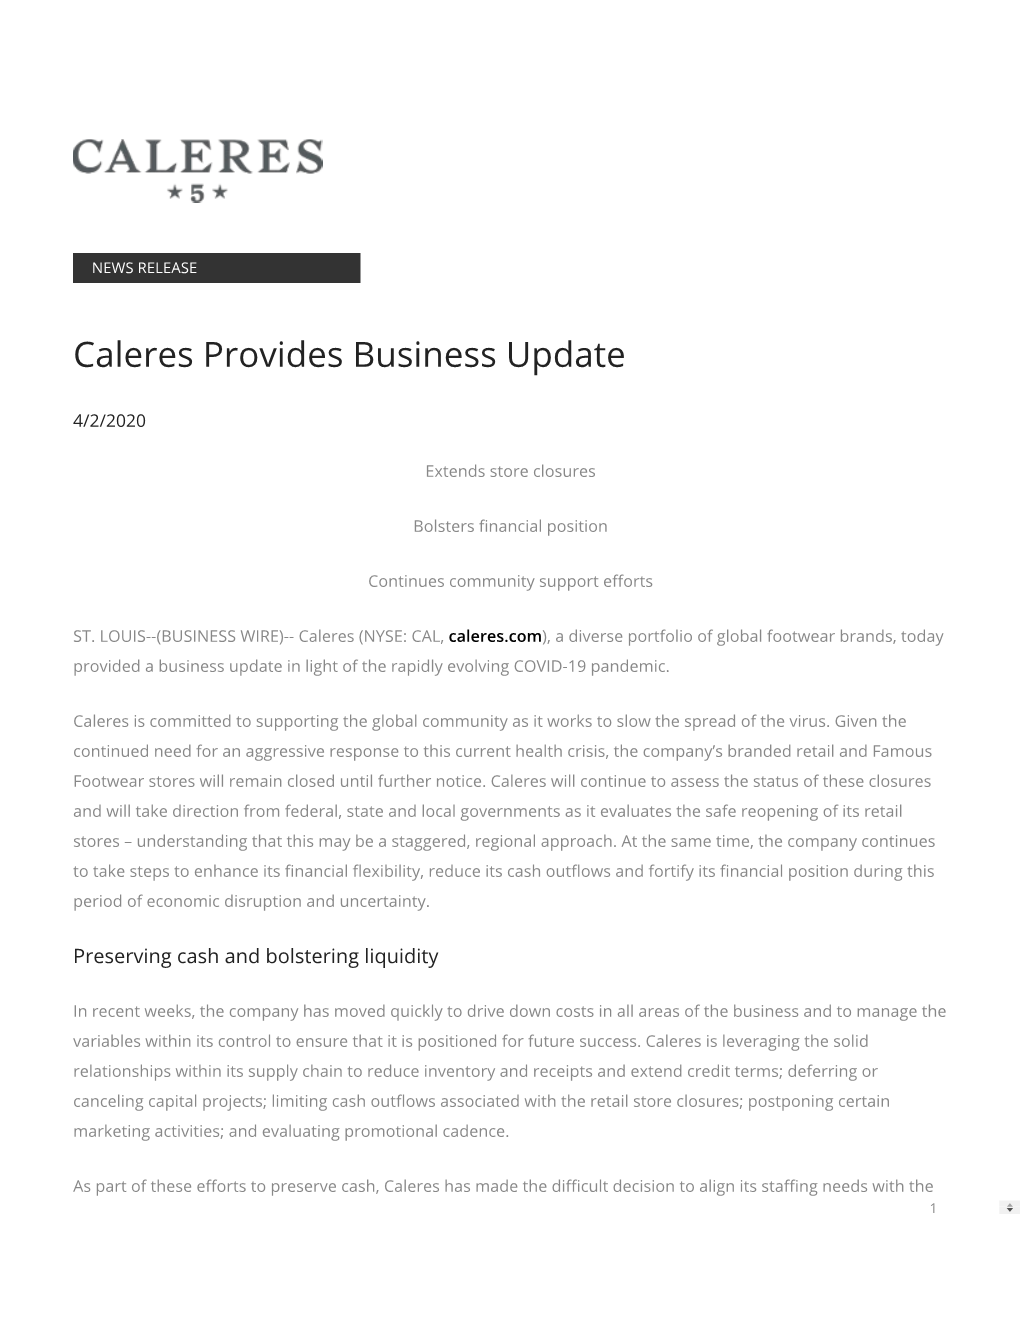 Caleres Provides Business Update